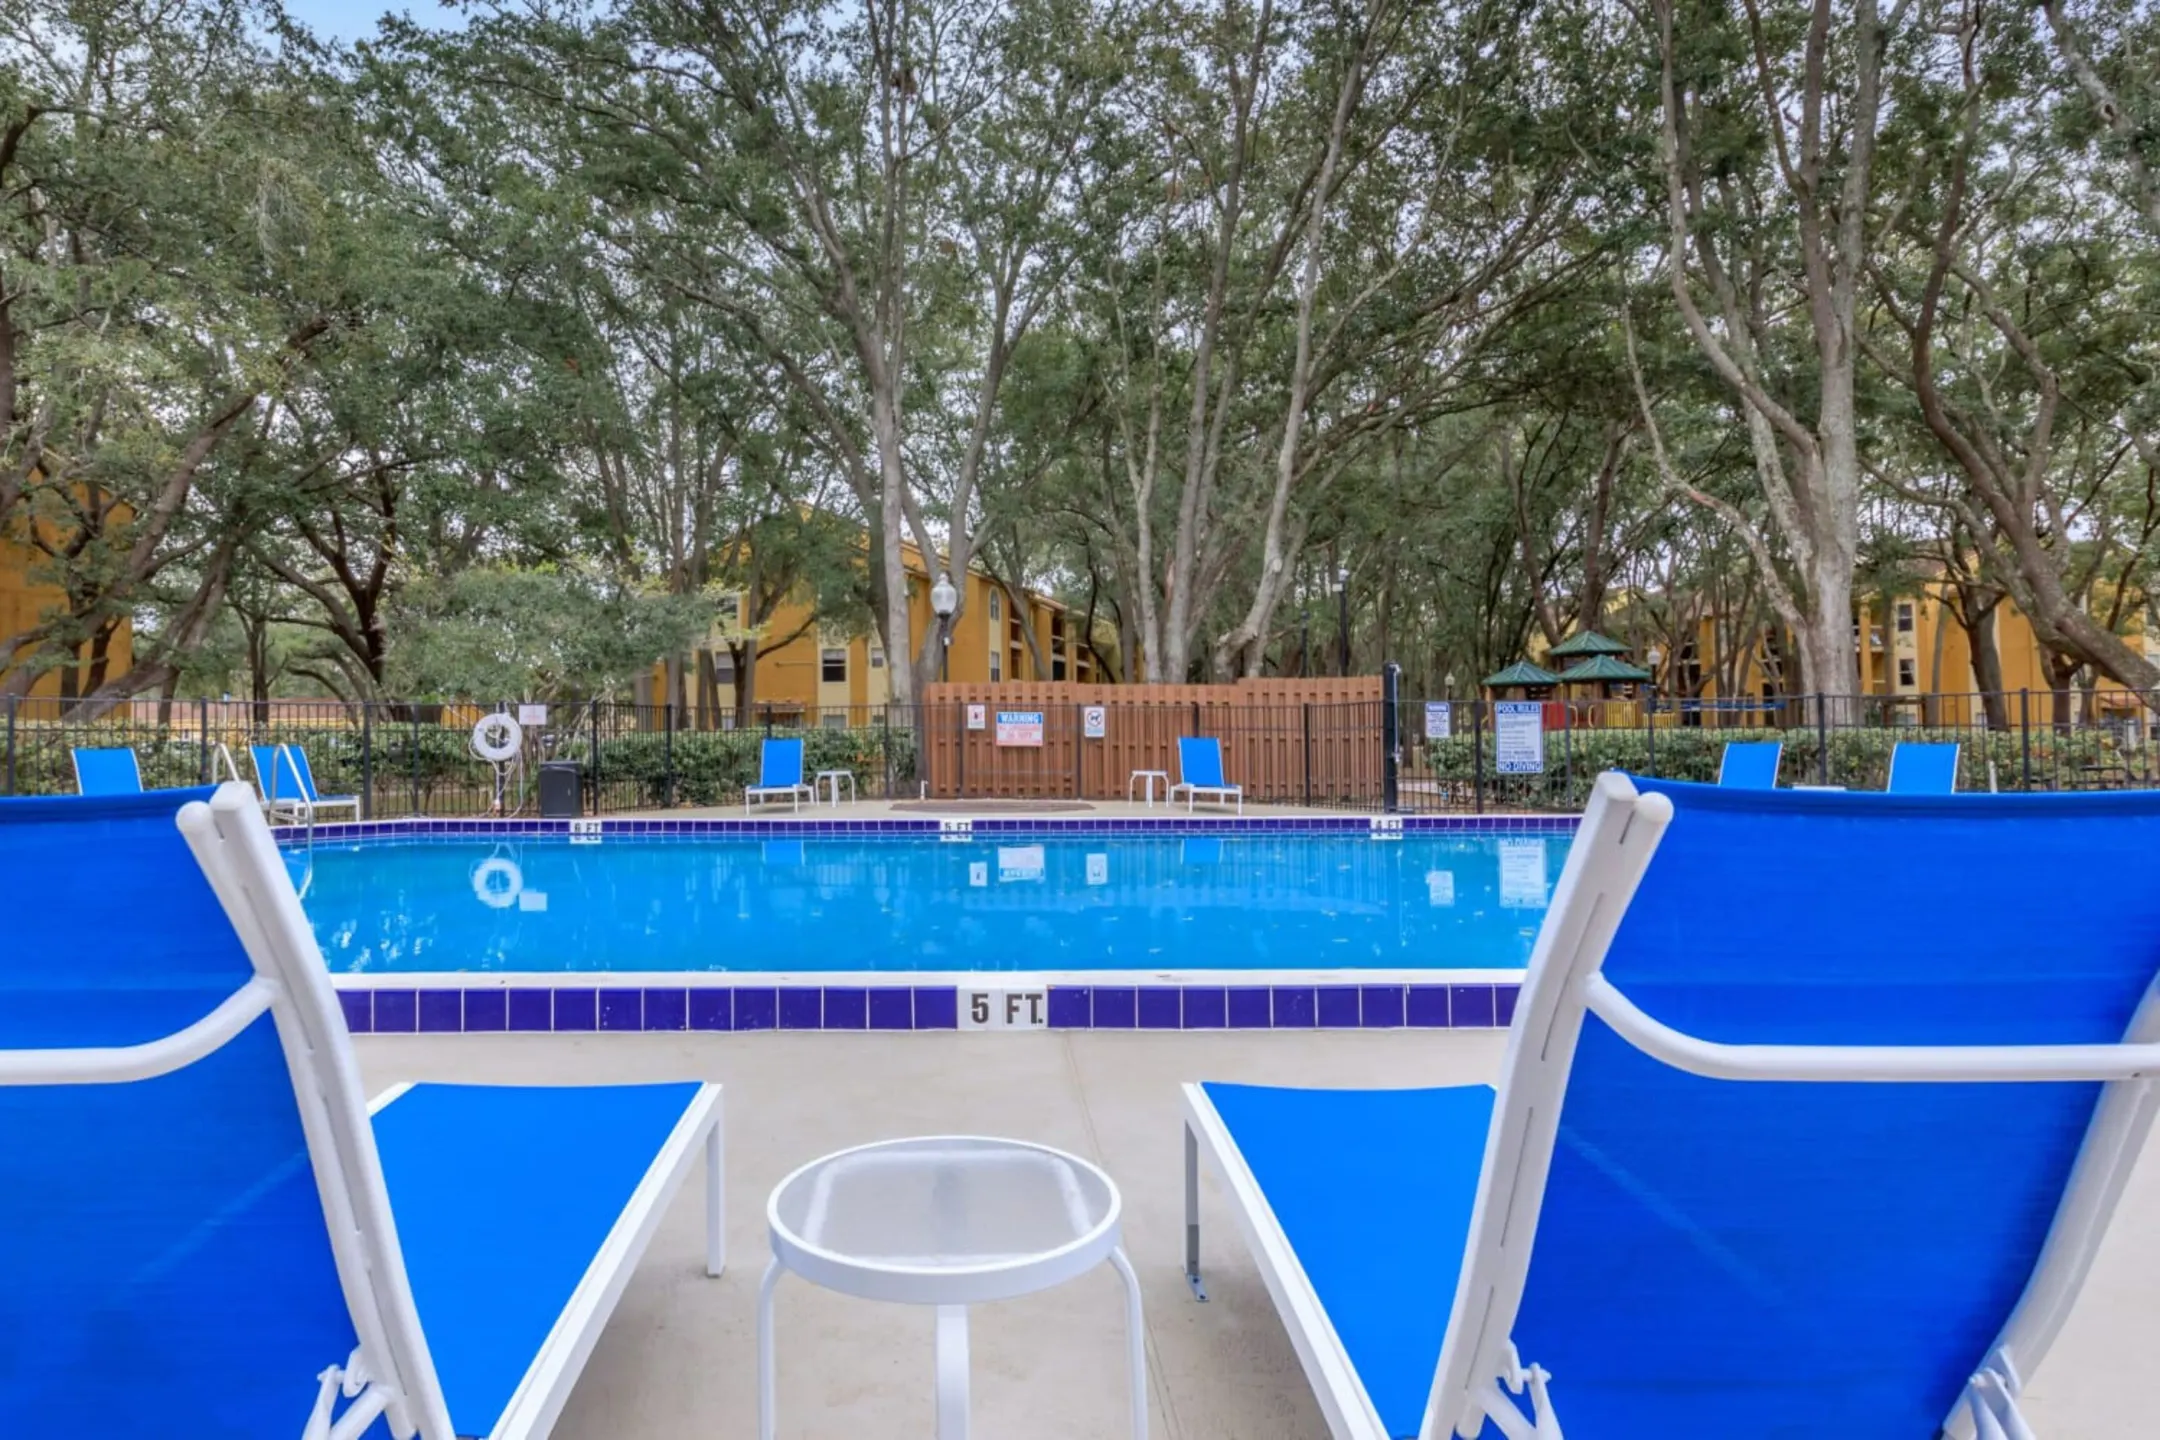 Pool - Images Apartments - Kissimmee, FL